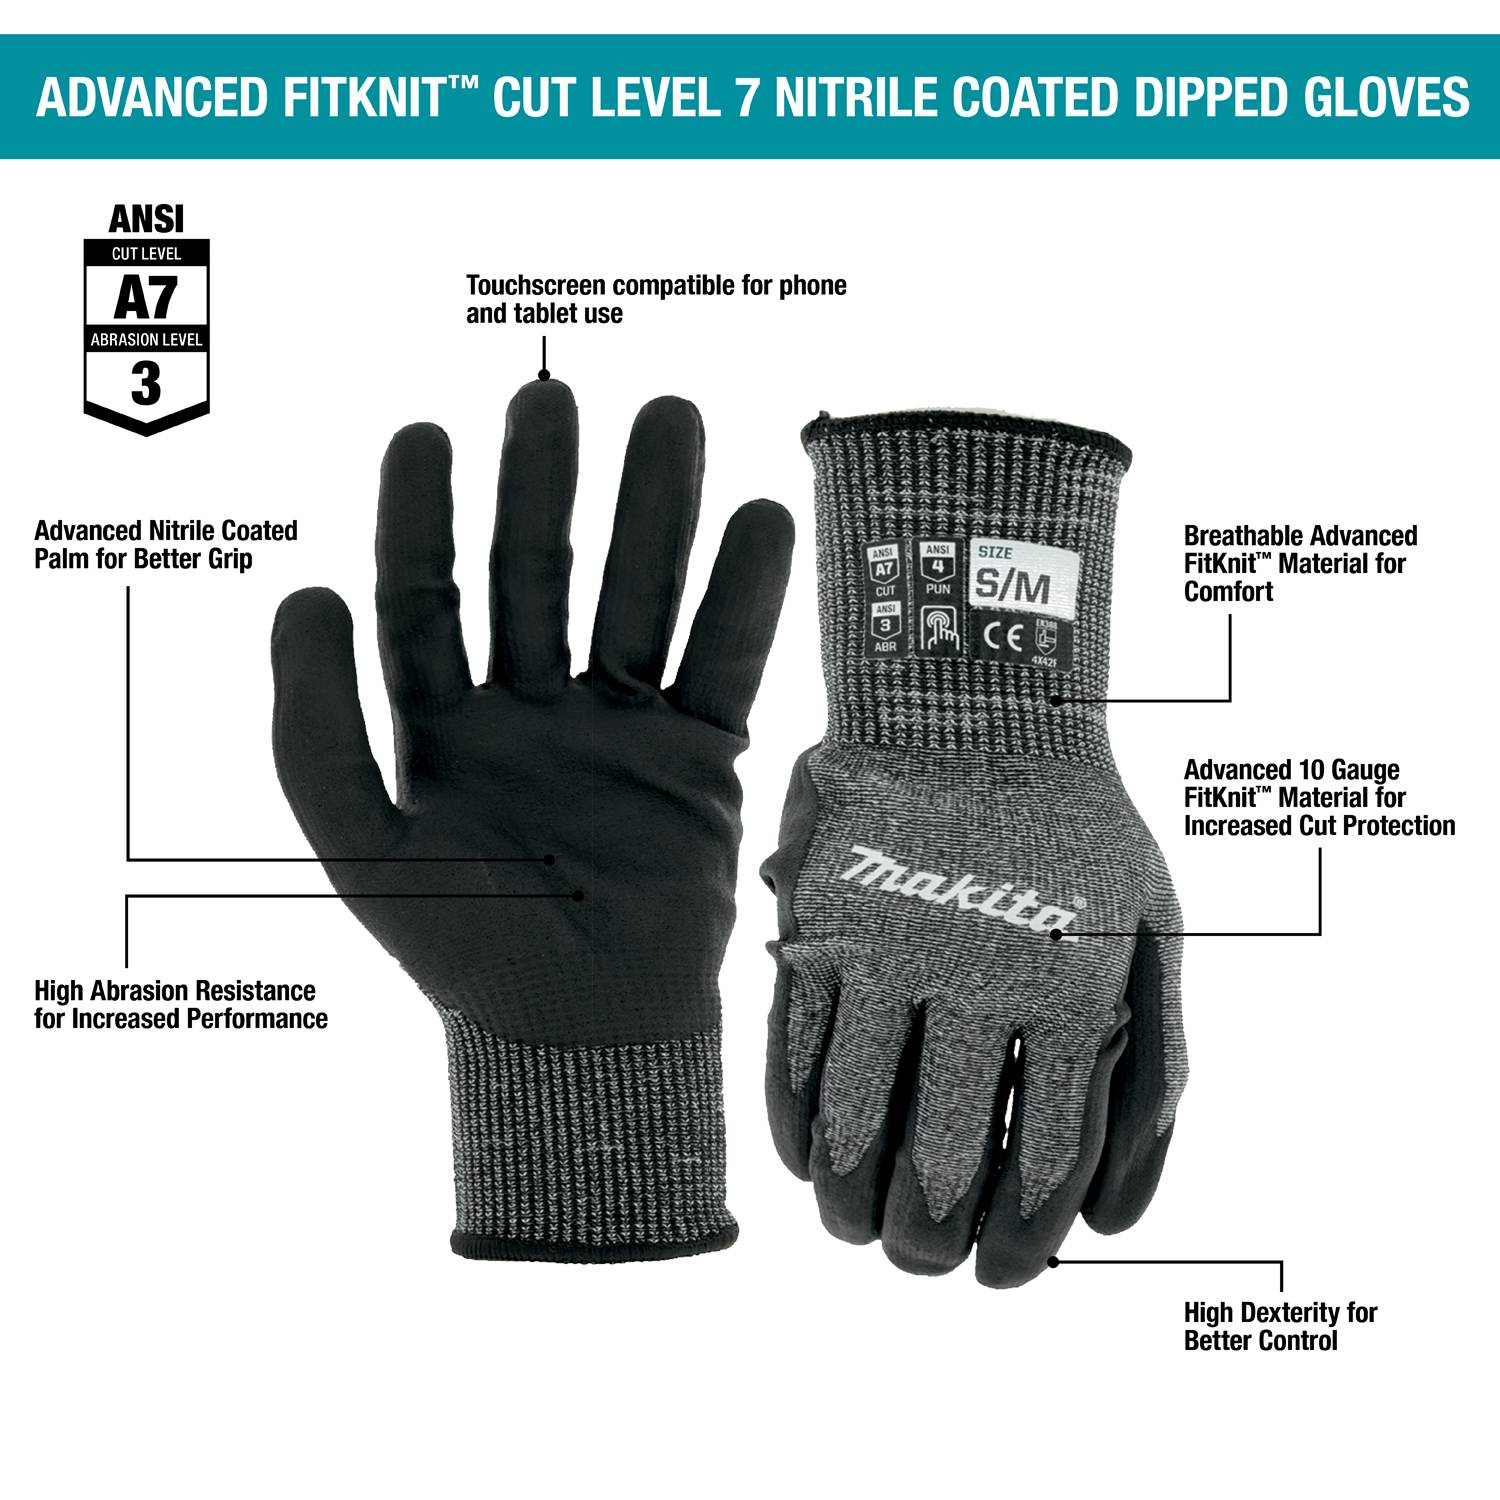 Makita Sm/Med Advanced Fitknit Cut Level 7 Nitrile Coated Dipped Gloves -  White Cap